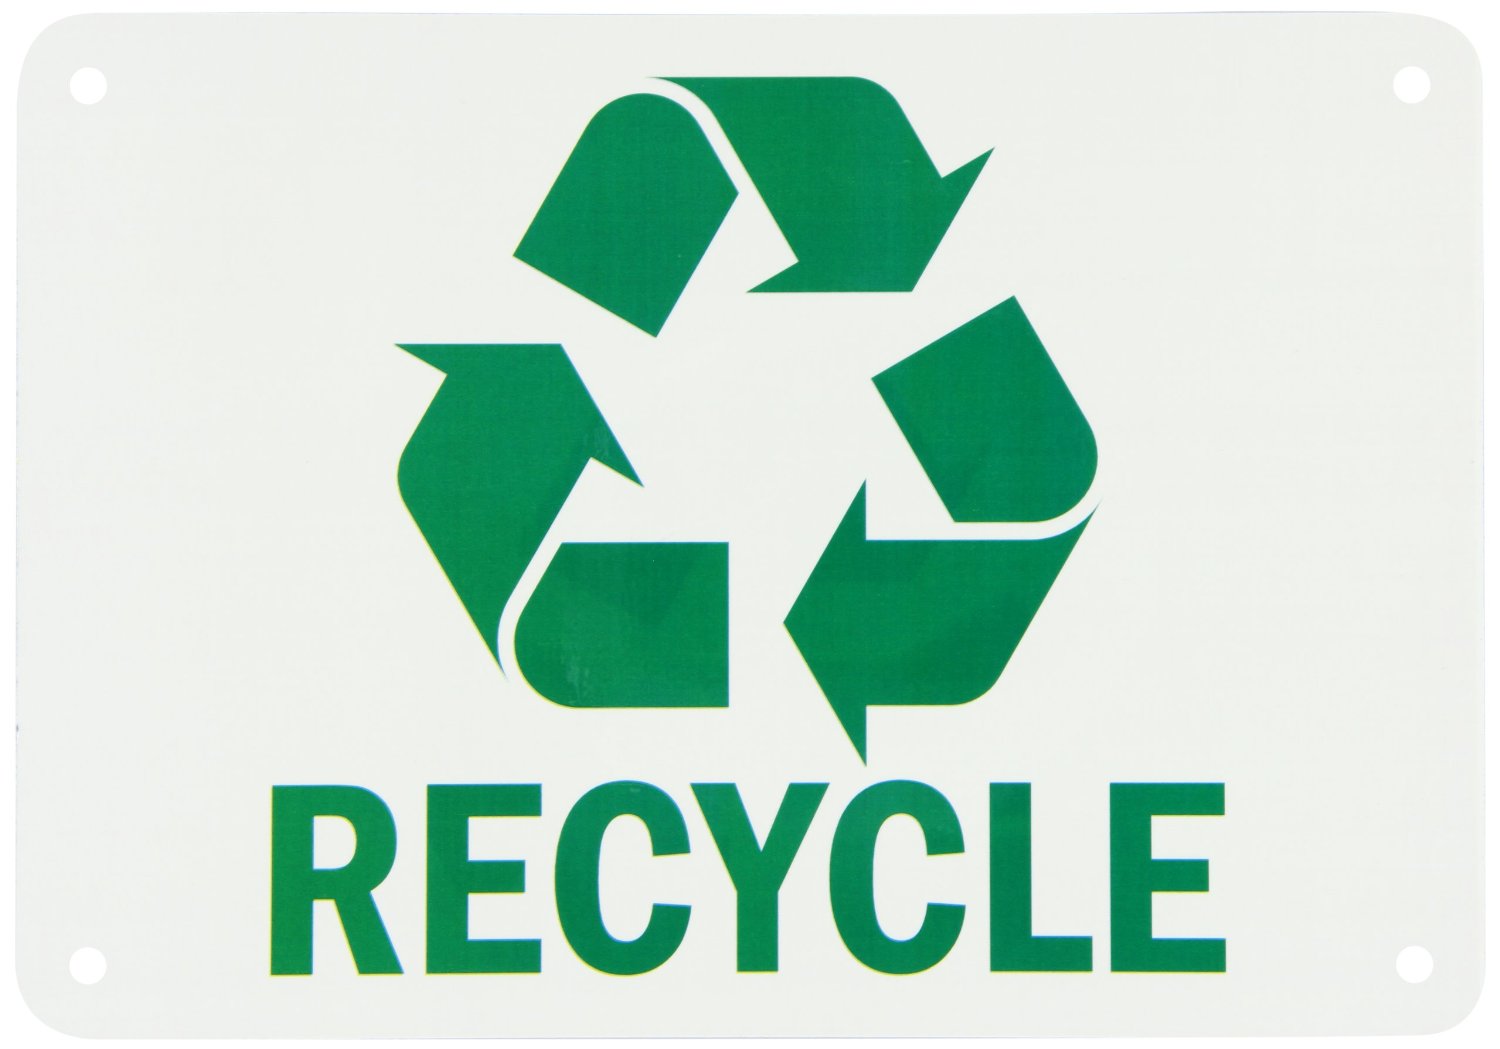 Recycle Sign Printable While Our Safety Sign Designs Are Based On